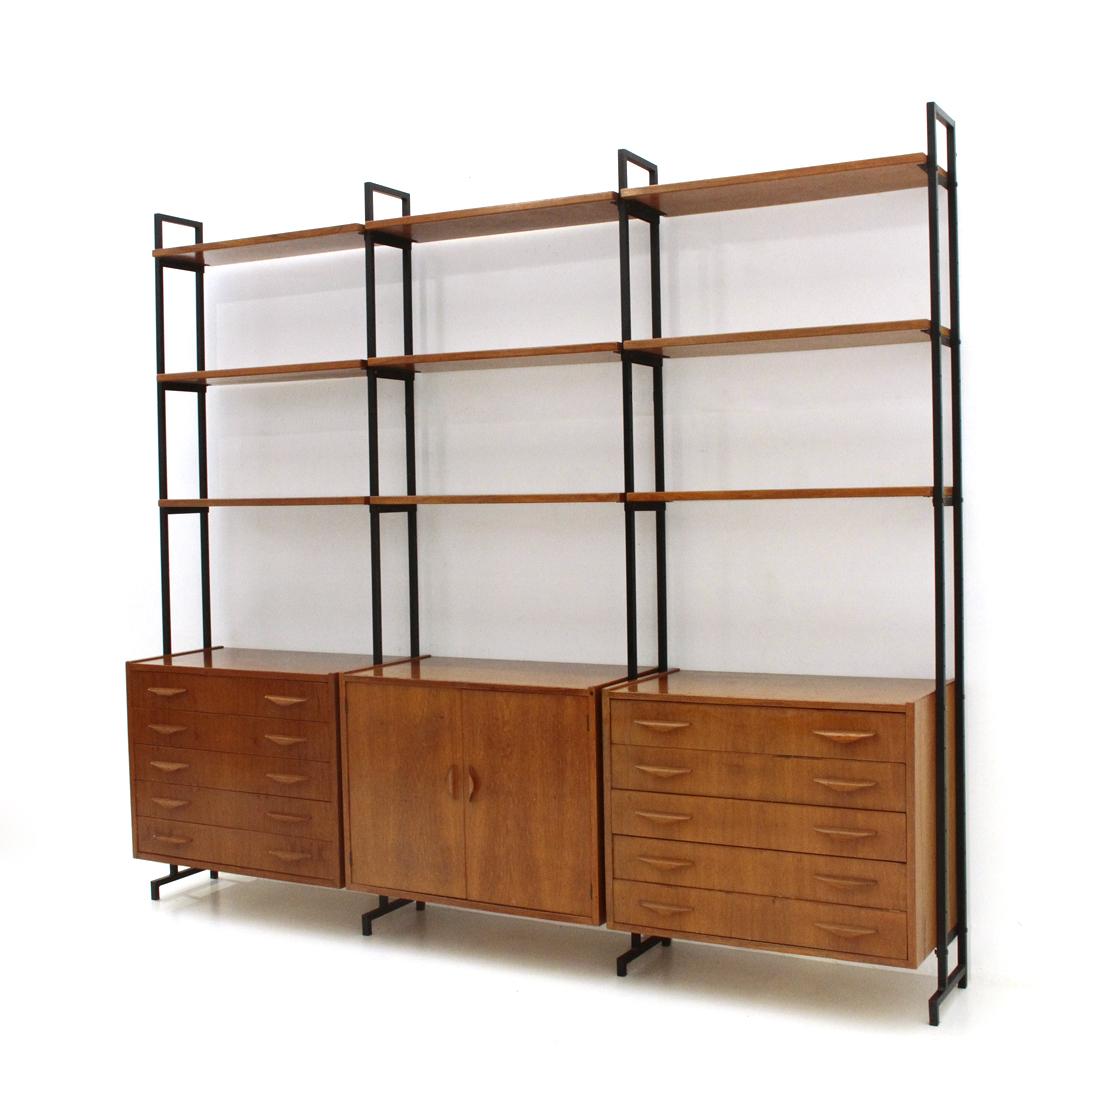 Mid-Century Modern Bookcase with 2 Drawers and Shelves, 1960s